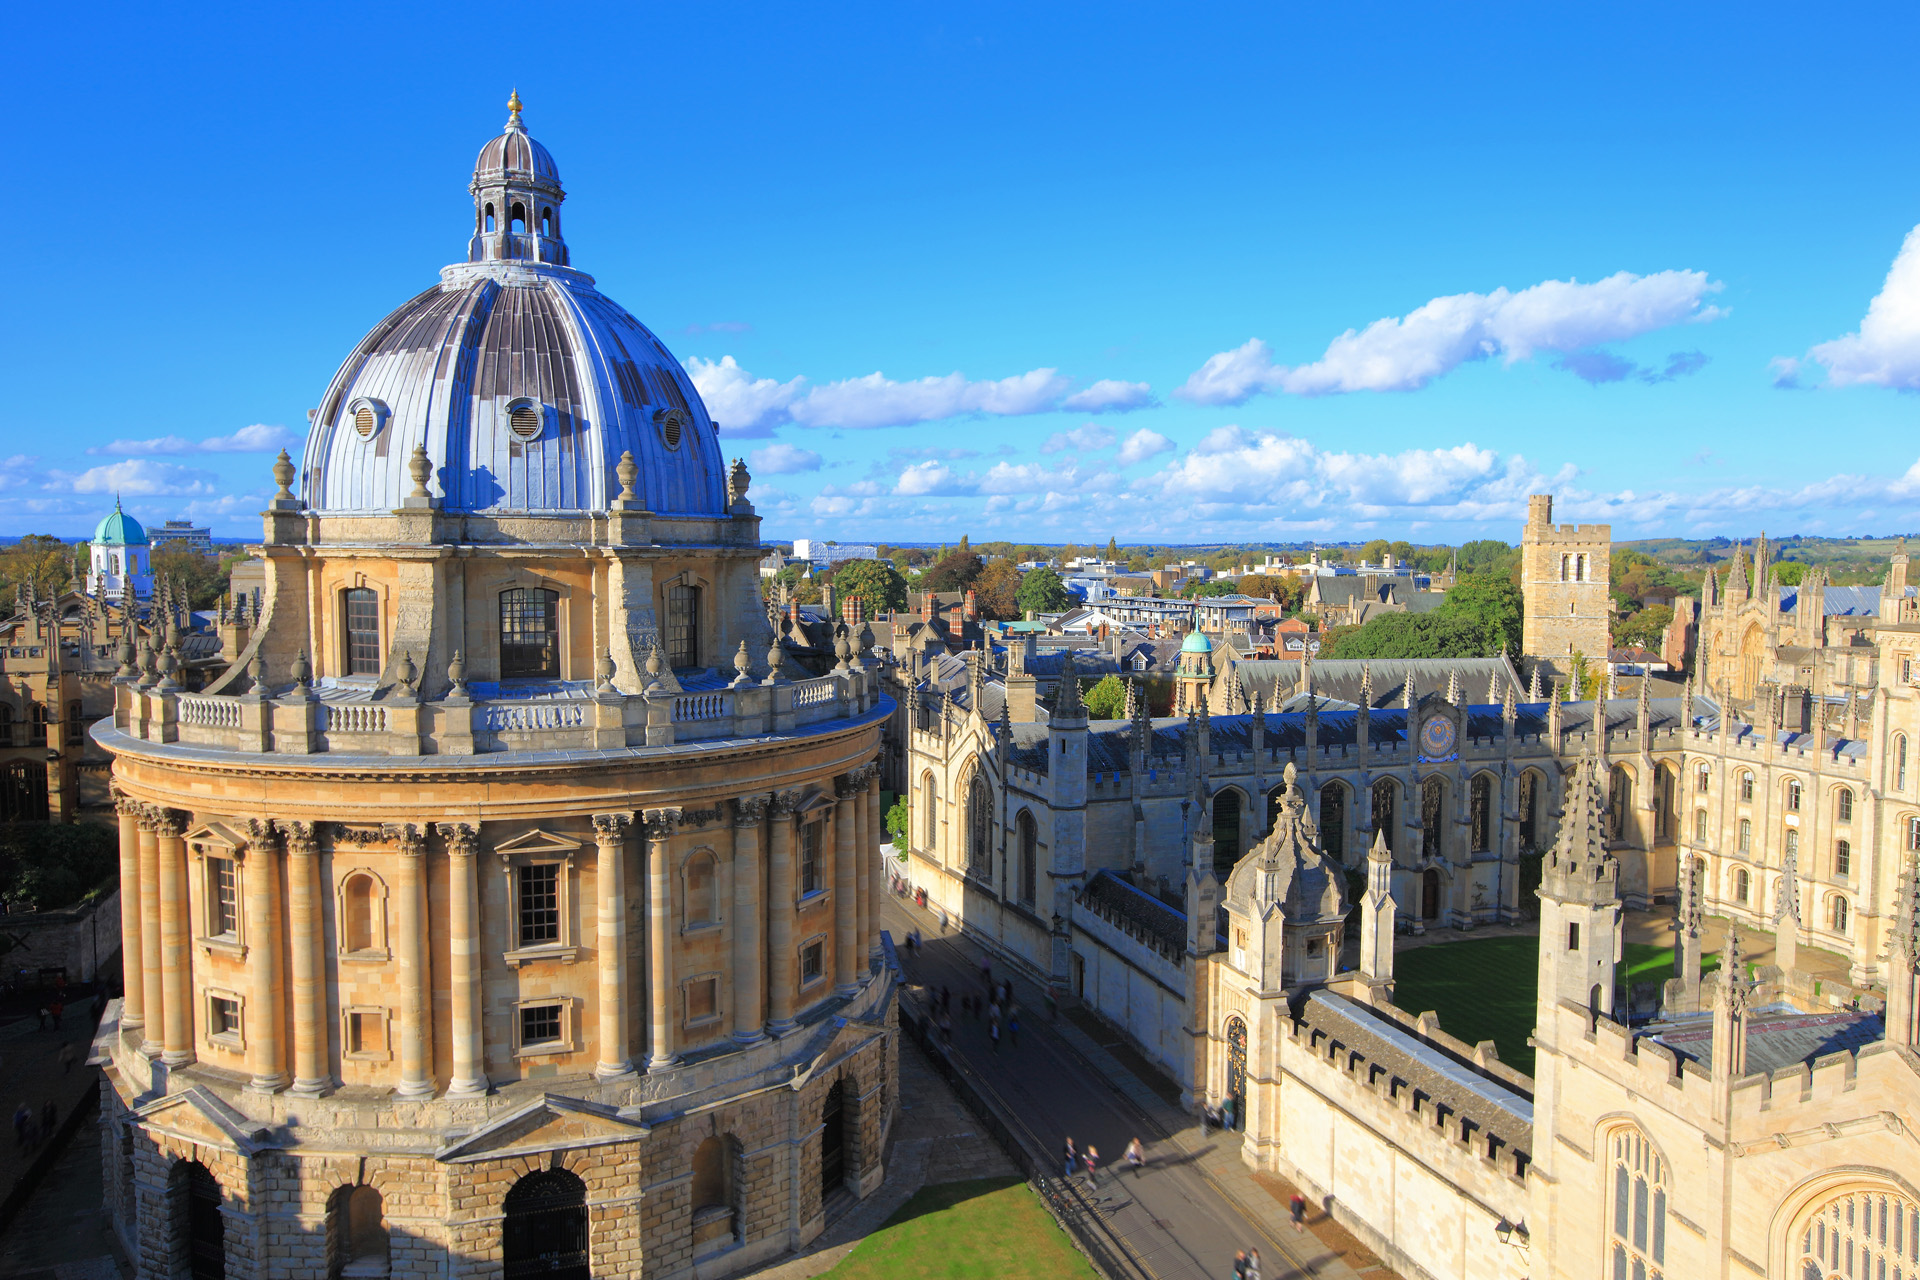 The Oxford University City, in the top of tower in St Marys Church. All Souls College, England